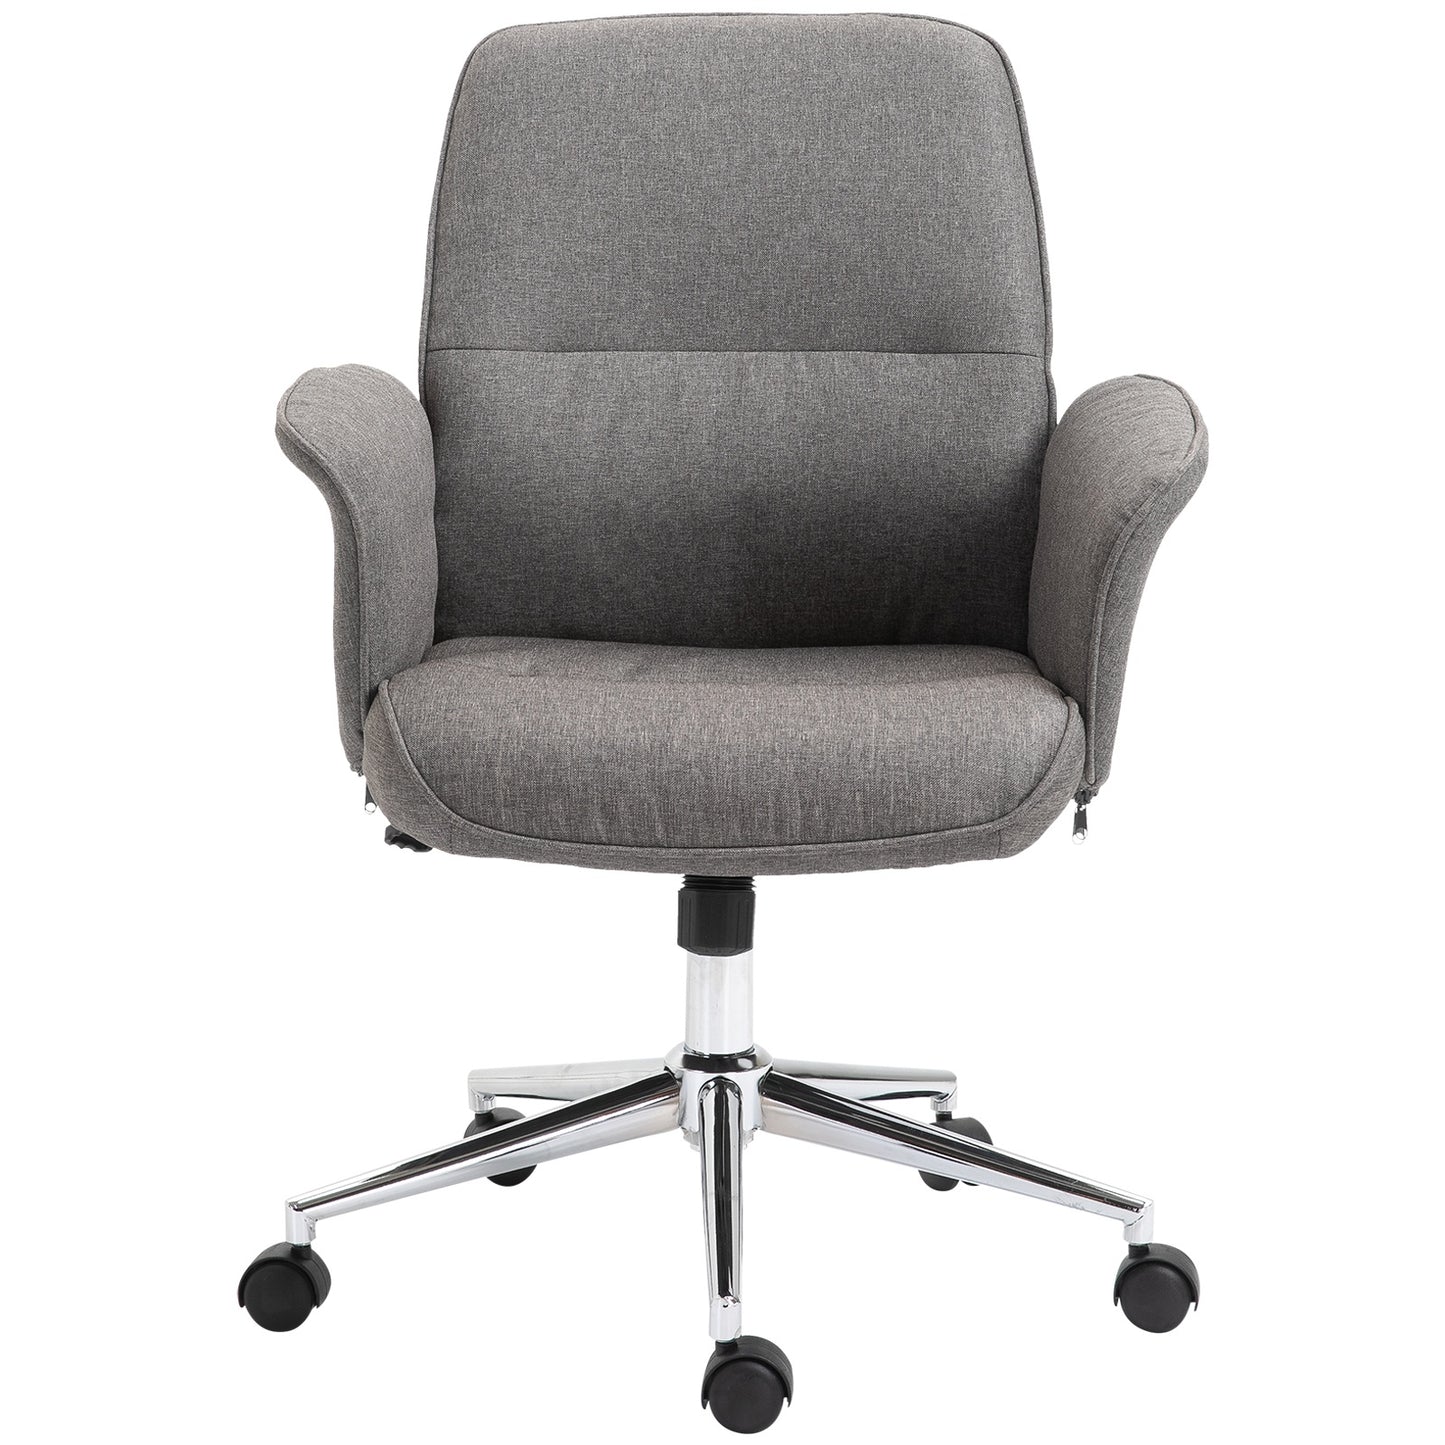 Vinsetto Rocking Office Desk Chair w/ Arm Rest on Wheels Adjustable Height Light Grey